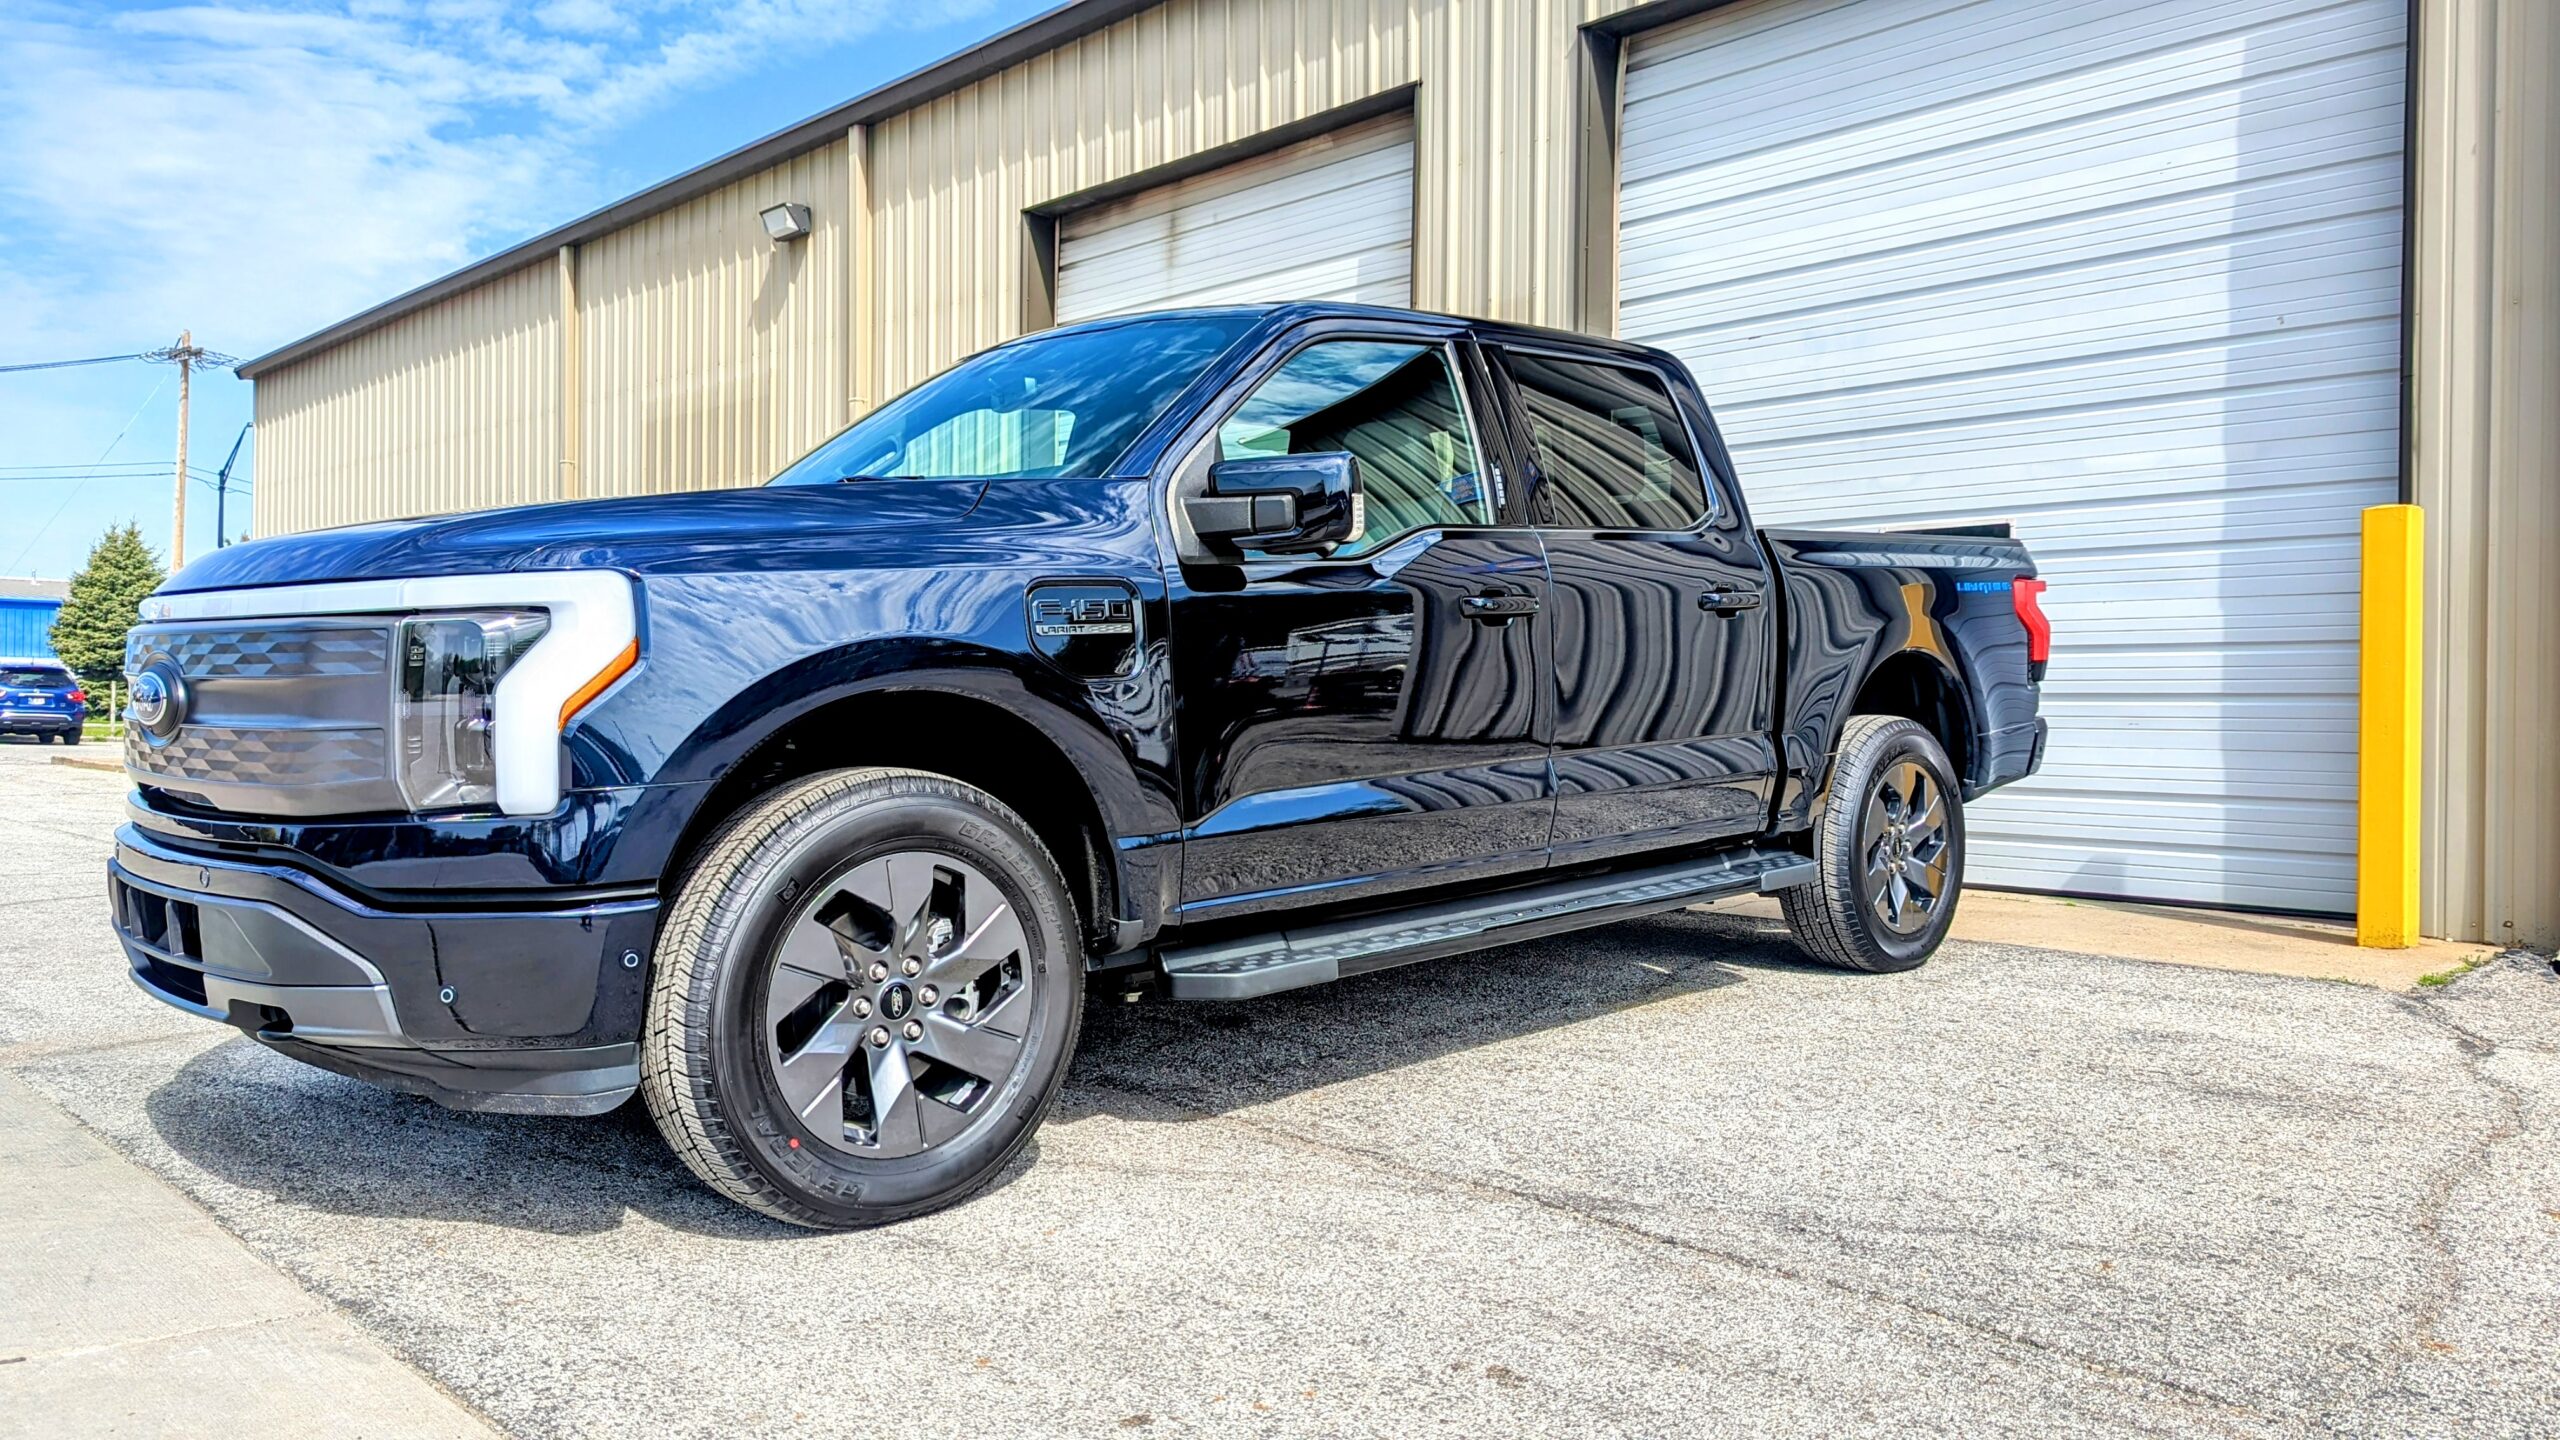 New Truck Paint Protection - is it worth it? Kings Valet